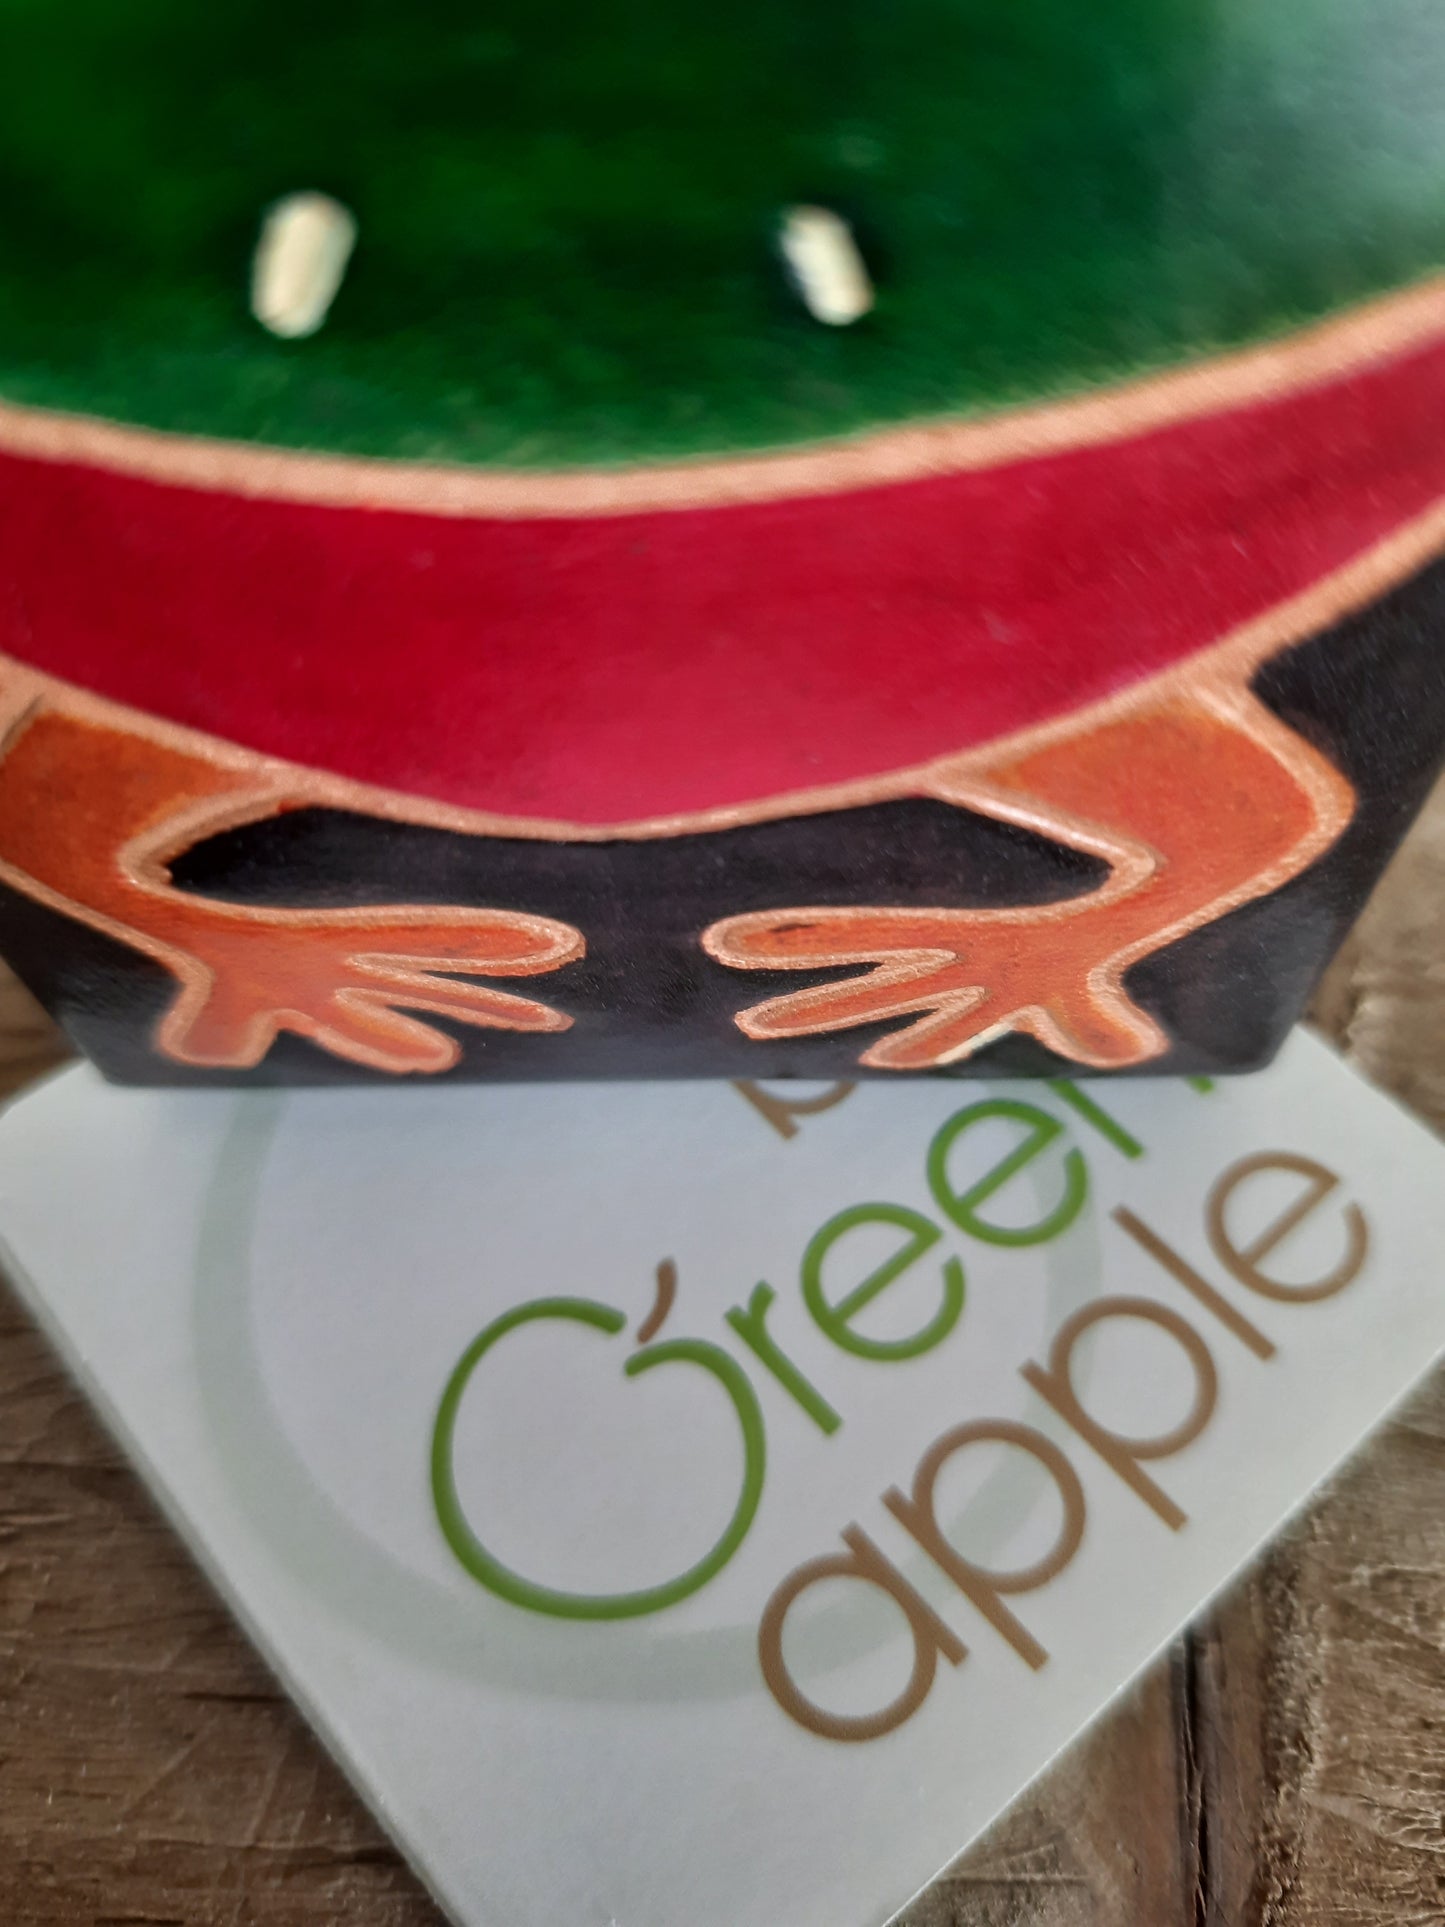 Money Boxes | Frog | Leather | Fair Trade Brands | Piggy Bank | Shop Ethical